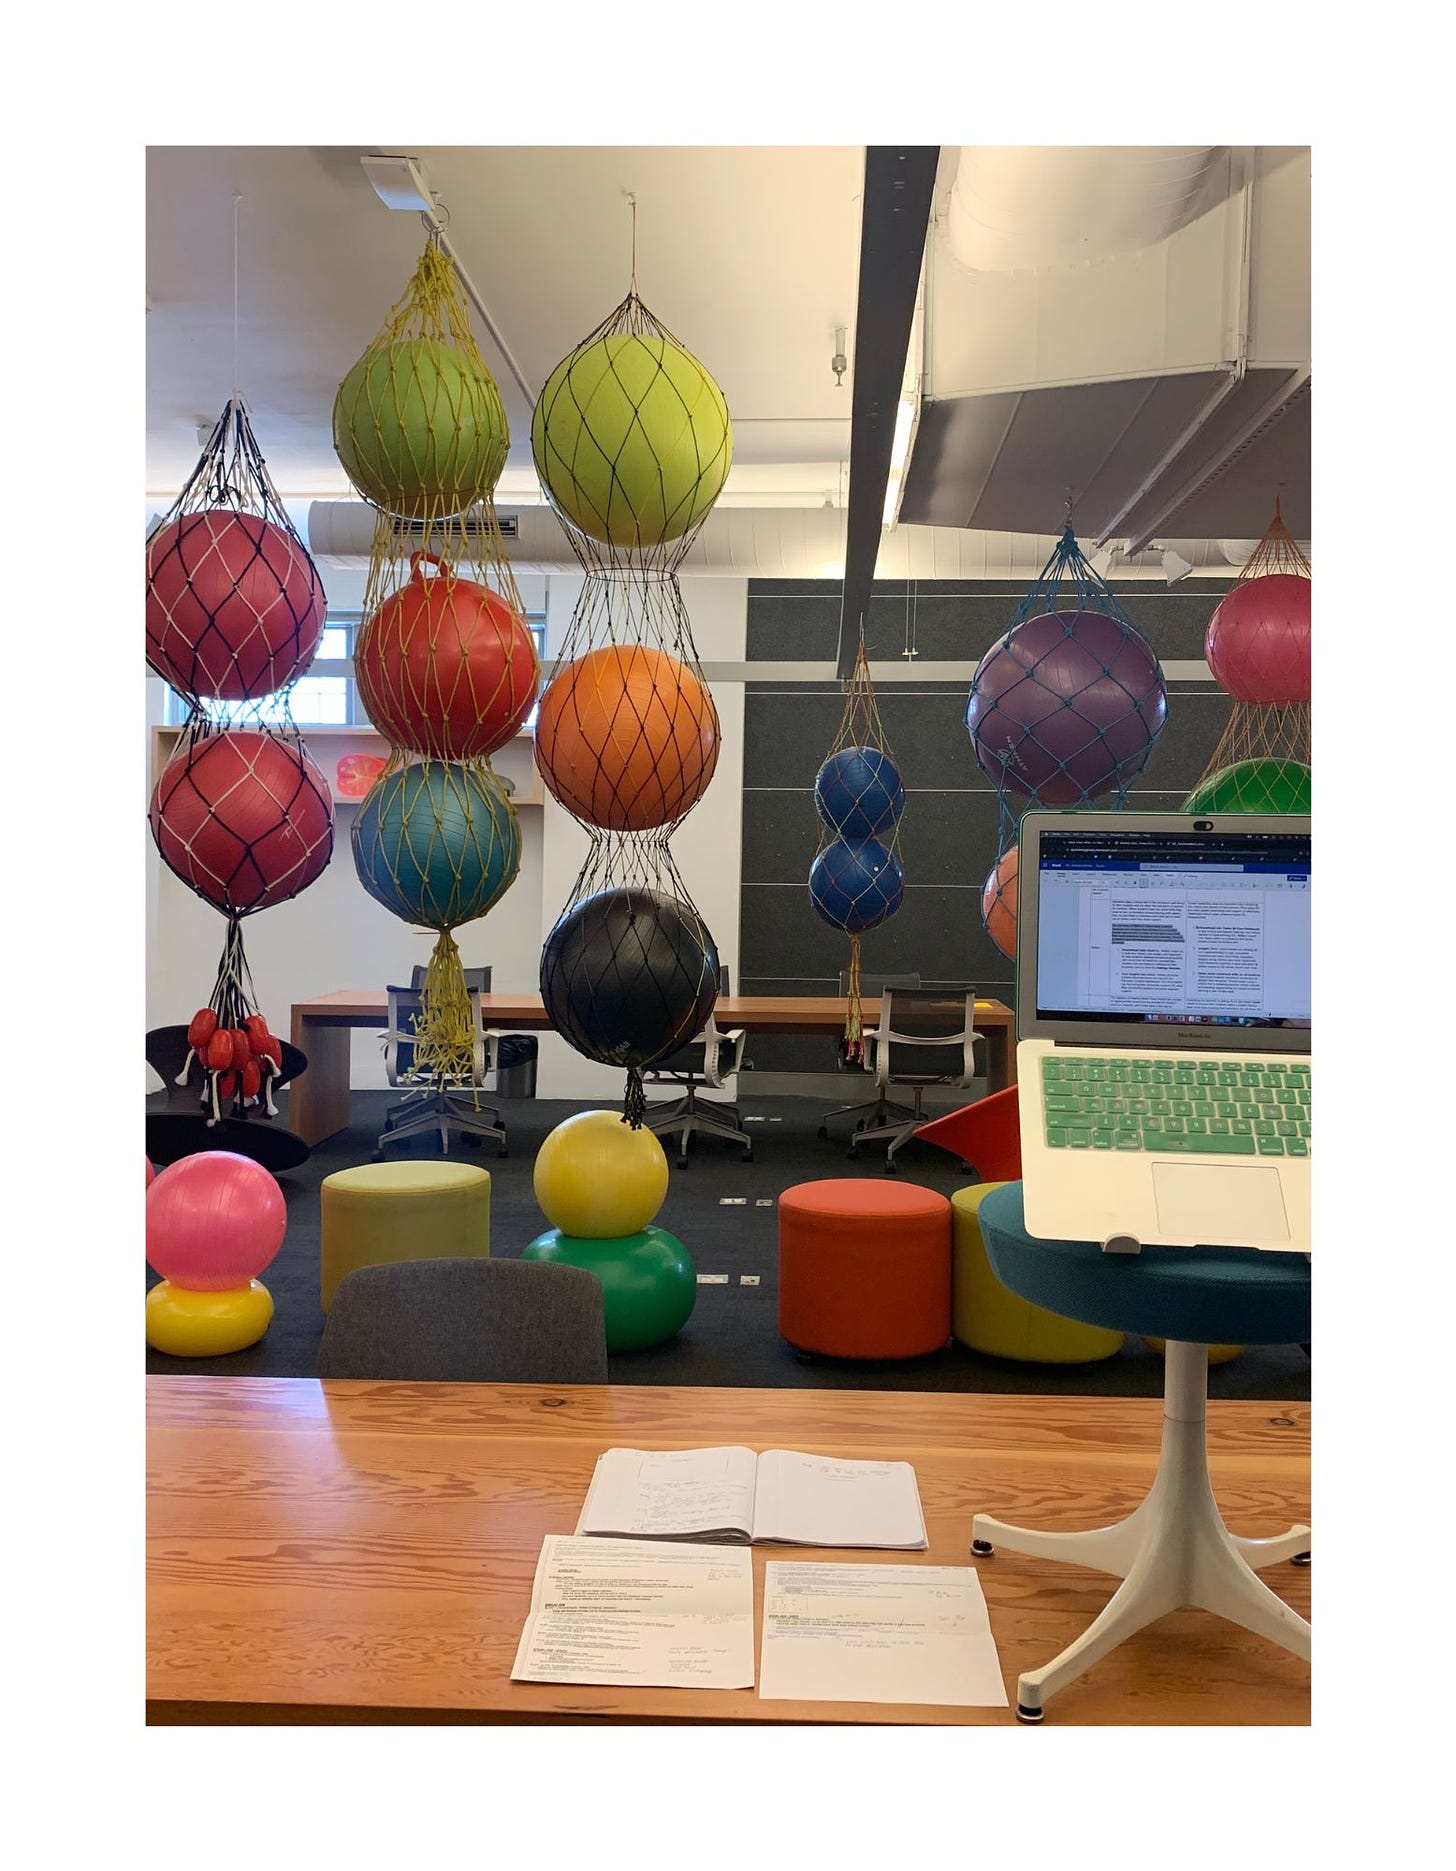 An office with installation art featuring several nets filled with colorful medicine balls.